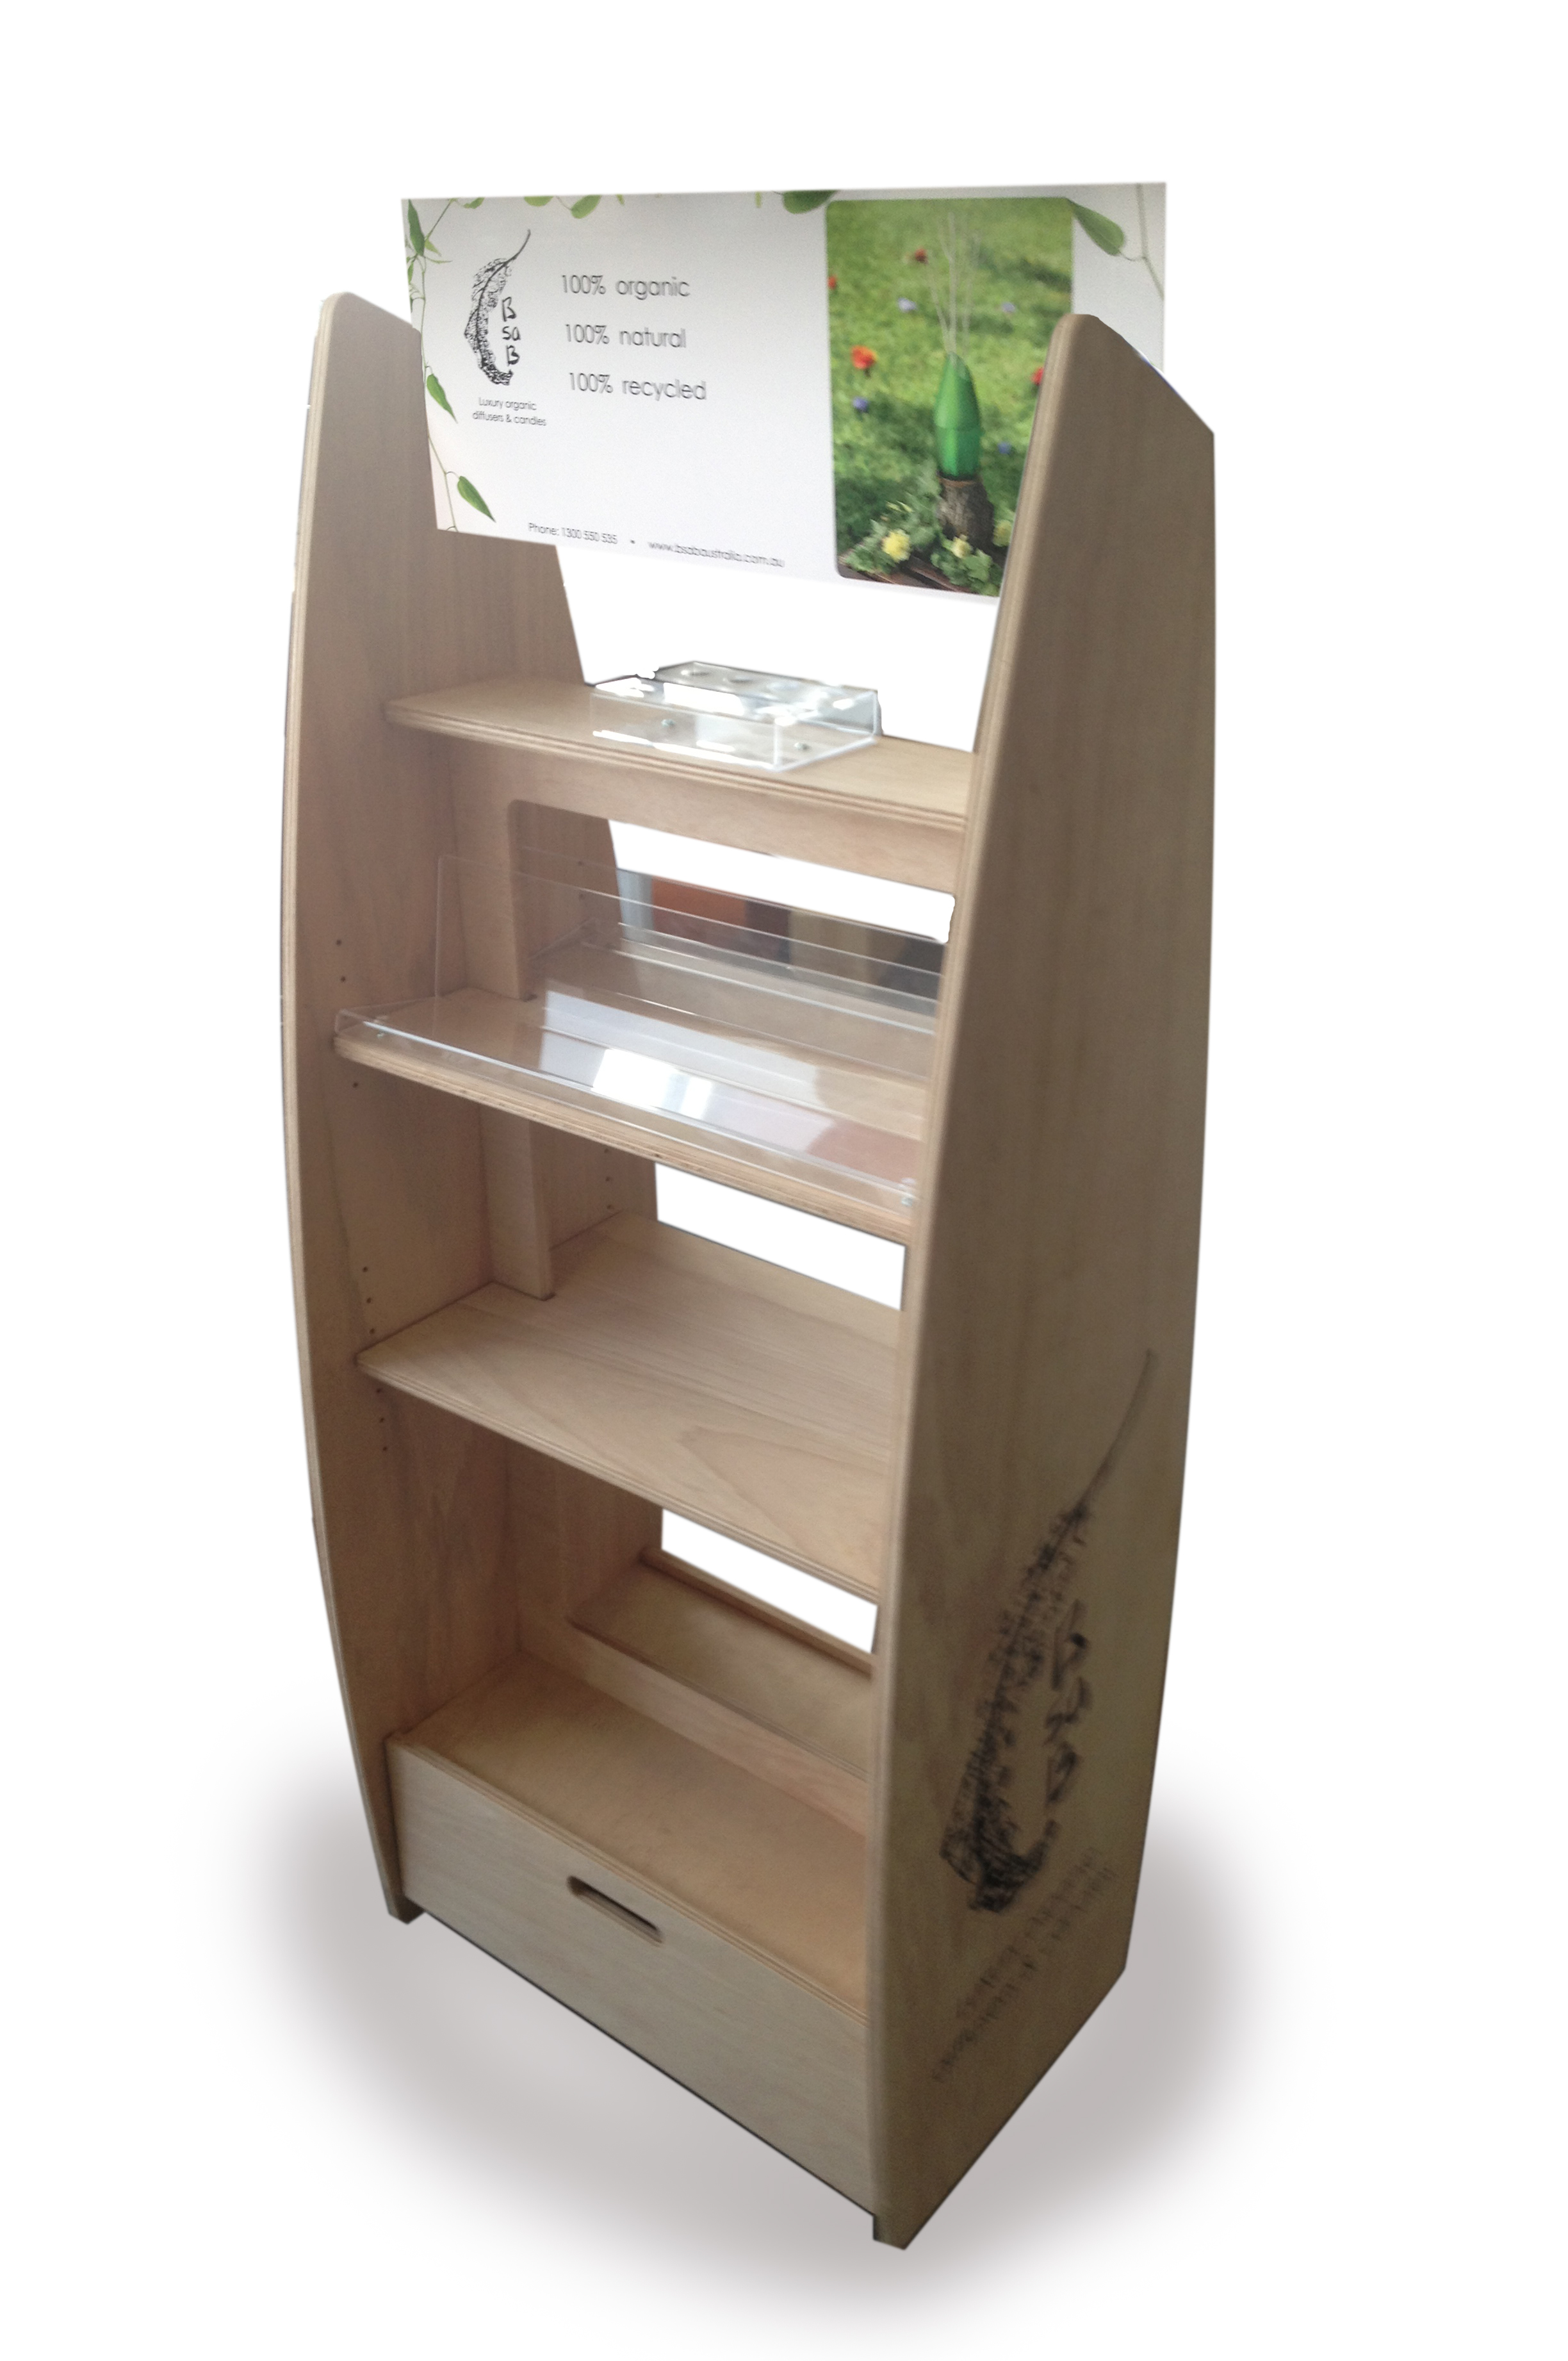  Flatpack Plywood floorstand with castors and storage underneath.&nbsp;Shoppable from both sides. &nbsp;Logo screenprinted directly on the sides.&nbsp; Interchangeable header card locates in slots. 